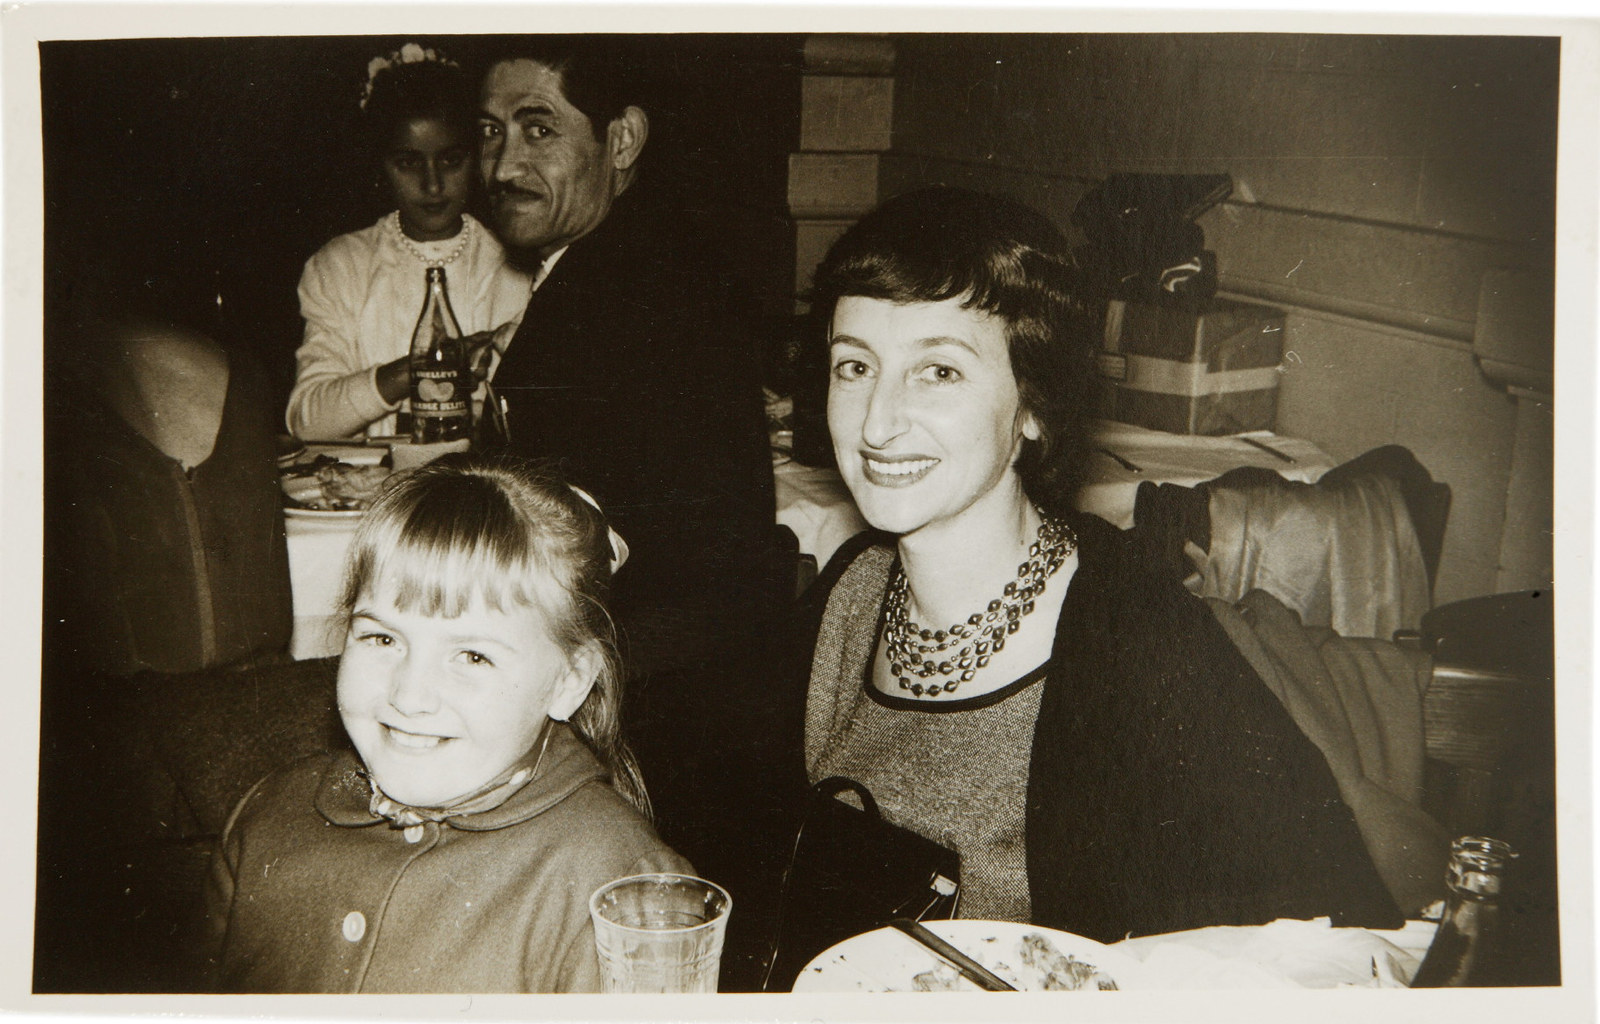 Black and white photo of woman and child in restaurant setting.